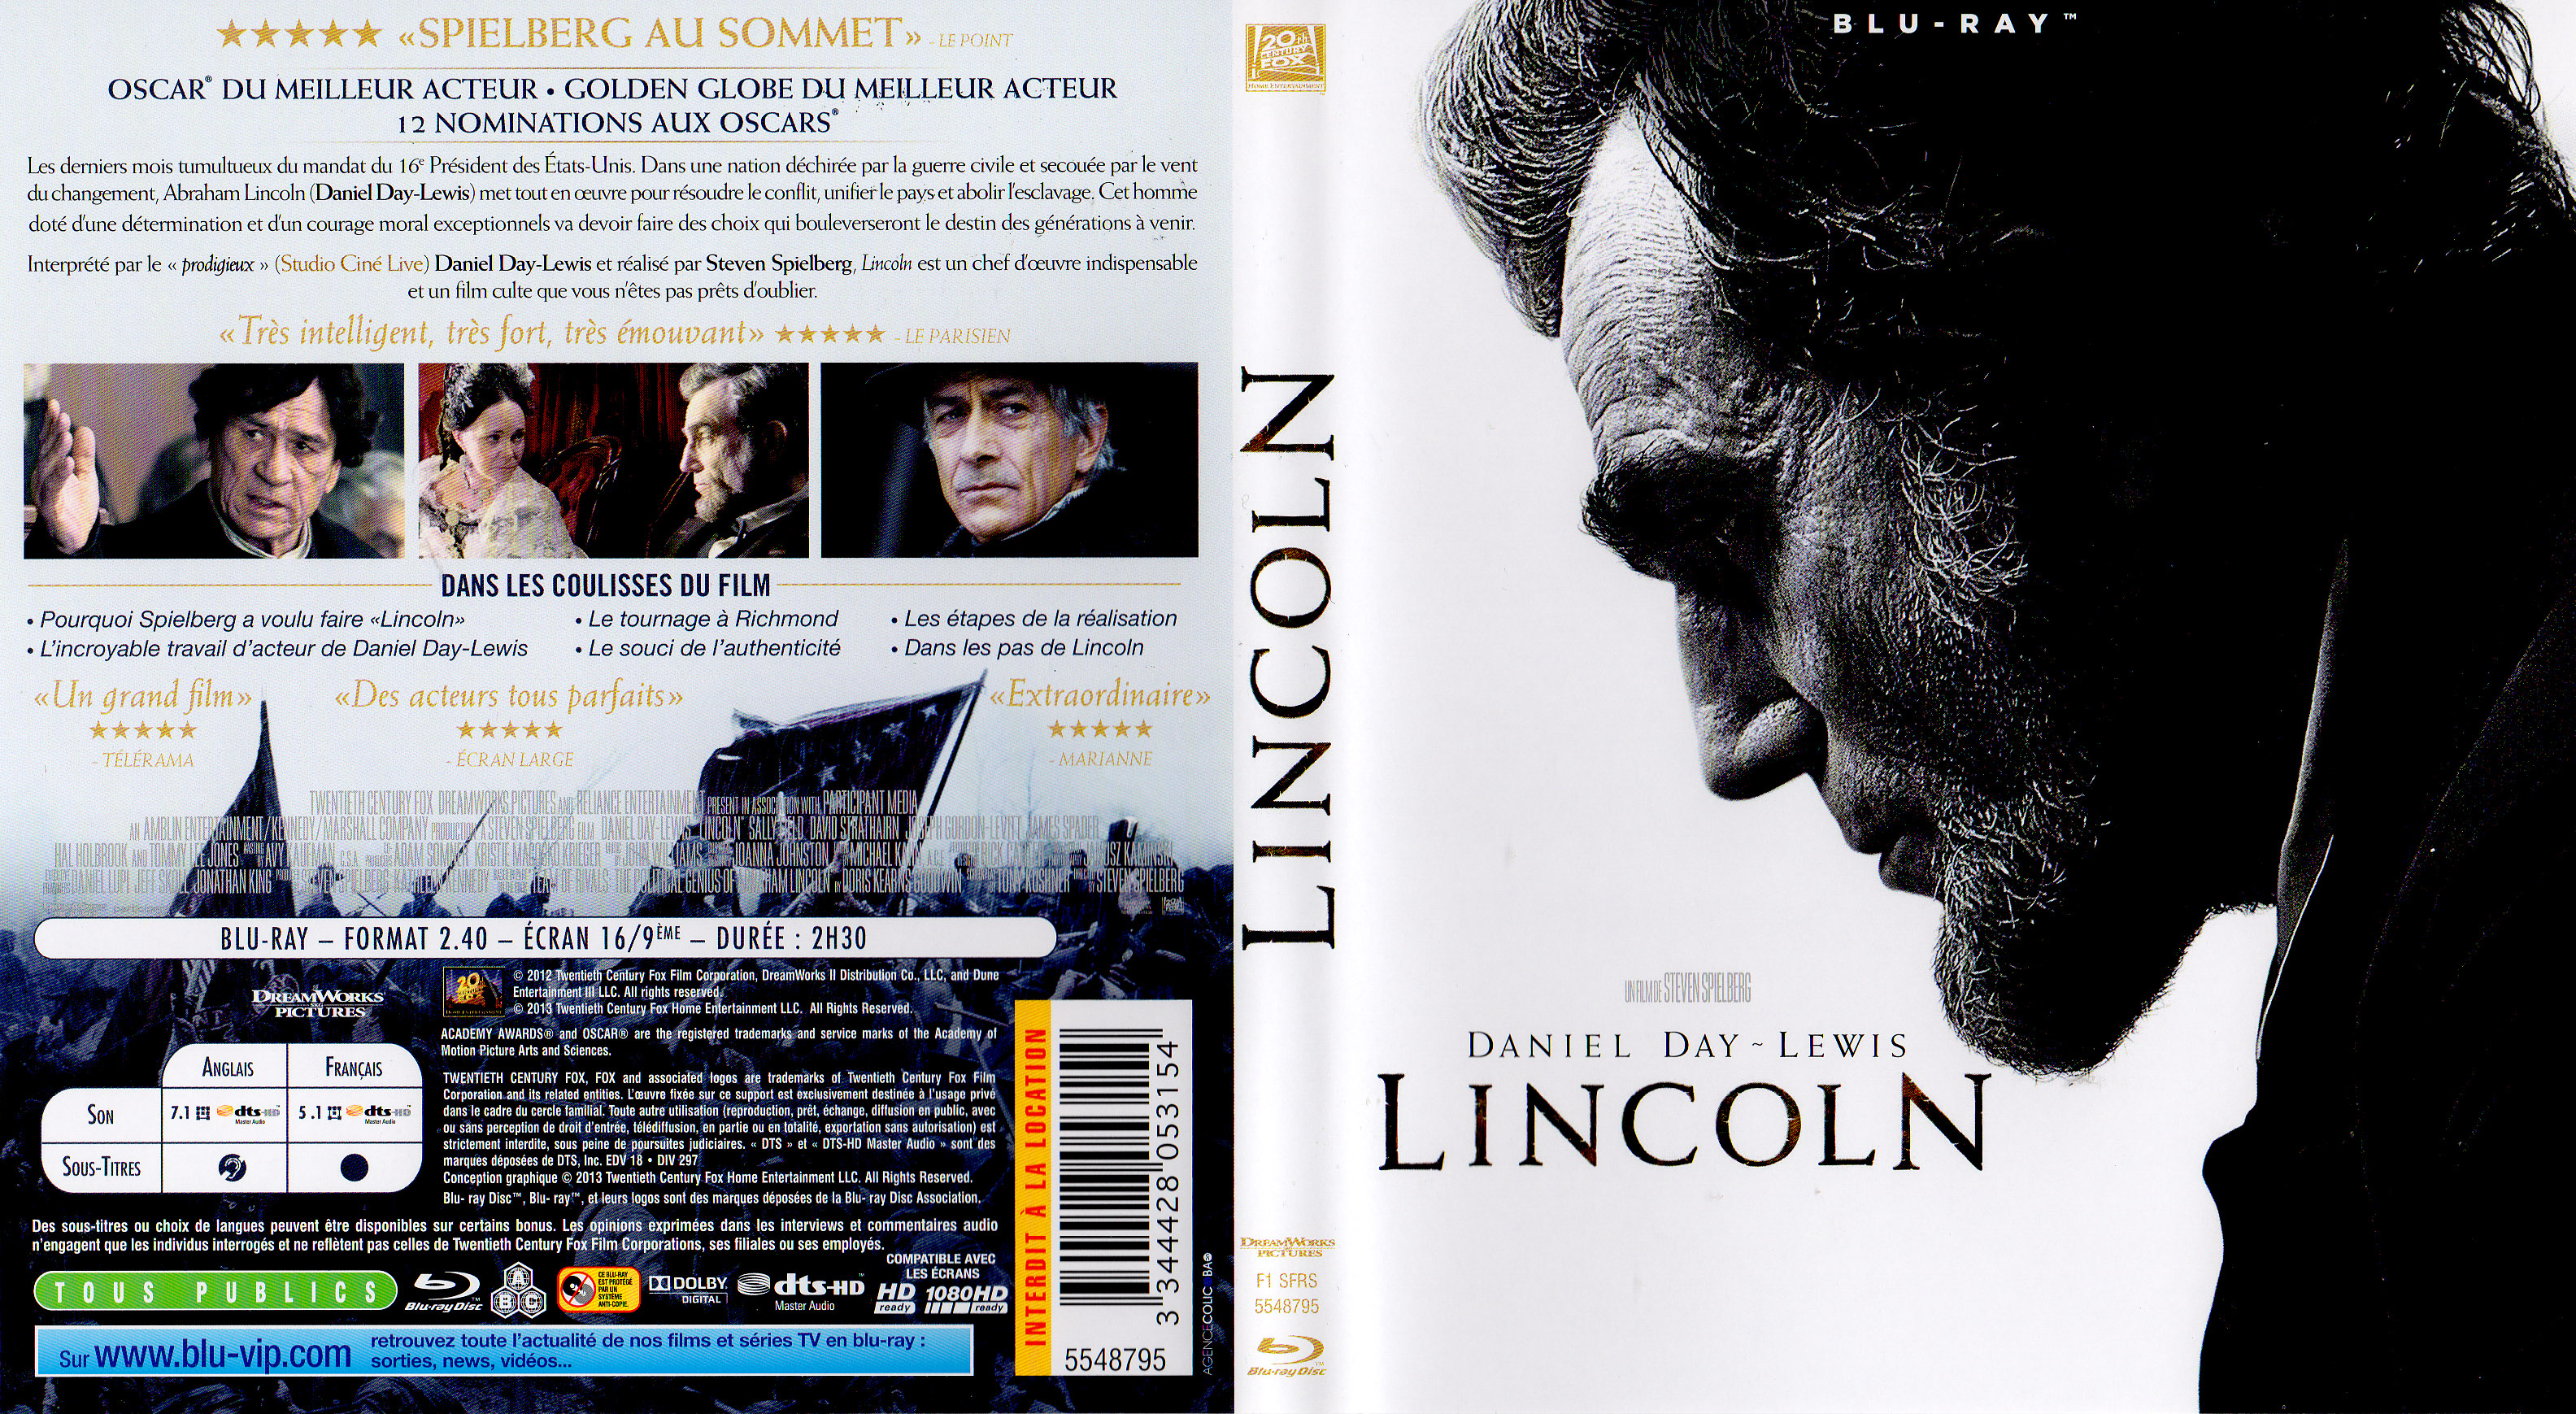 Jaquette DVD Lincoln (BLU-RAY)